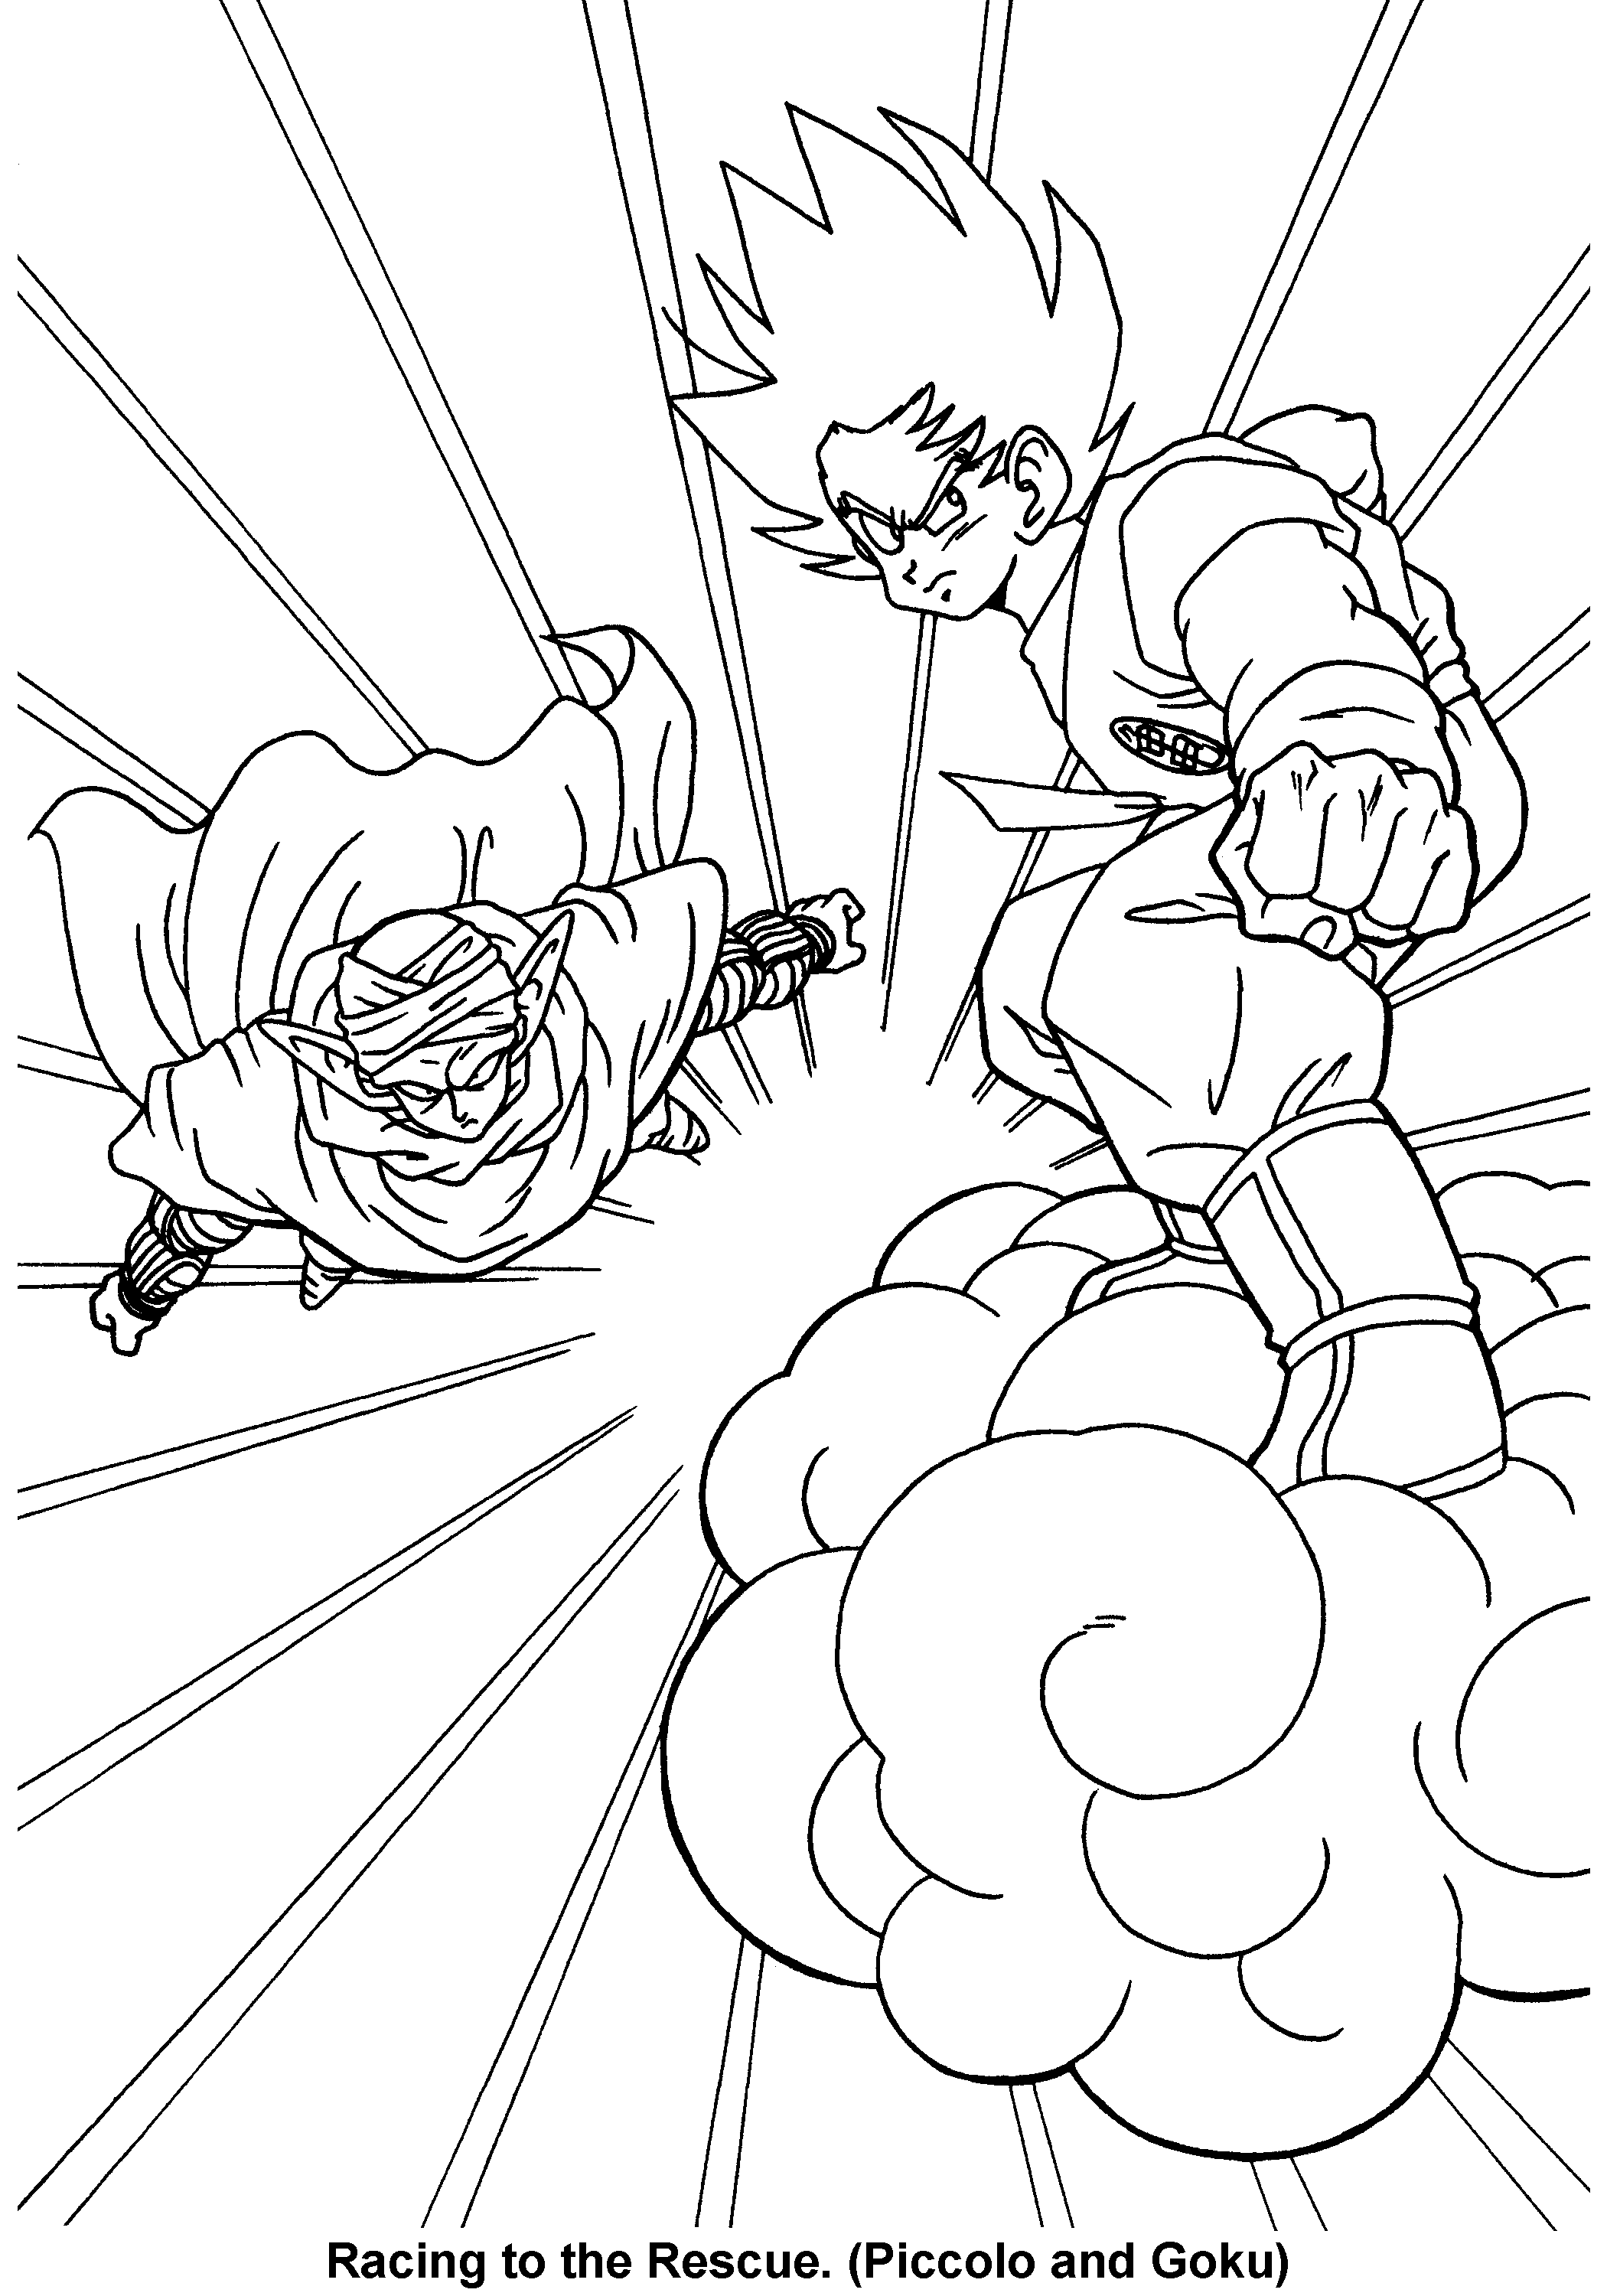 animated-coloring-pages-dragon-ball-z-image-0032